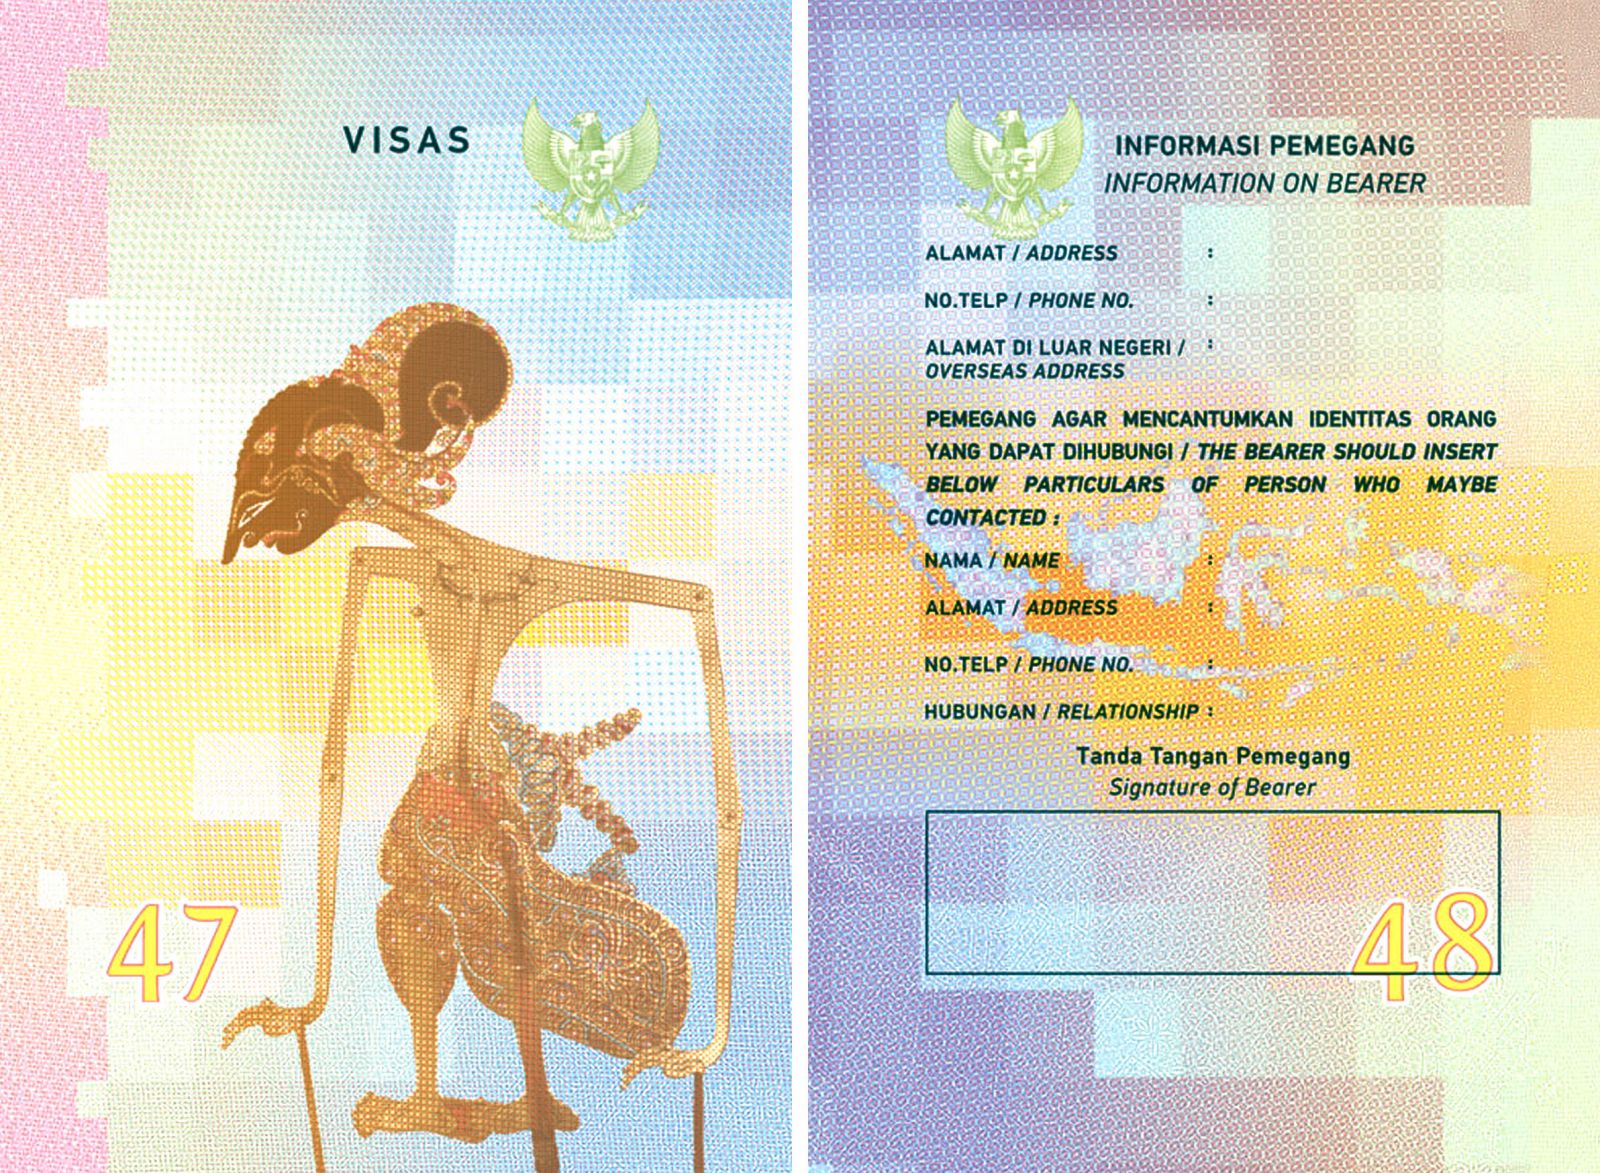 The Most Beautiful Passports In The World Seasia.co